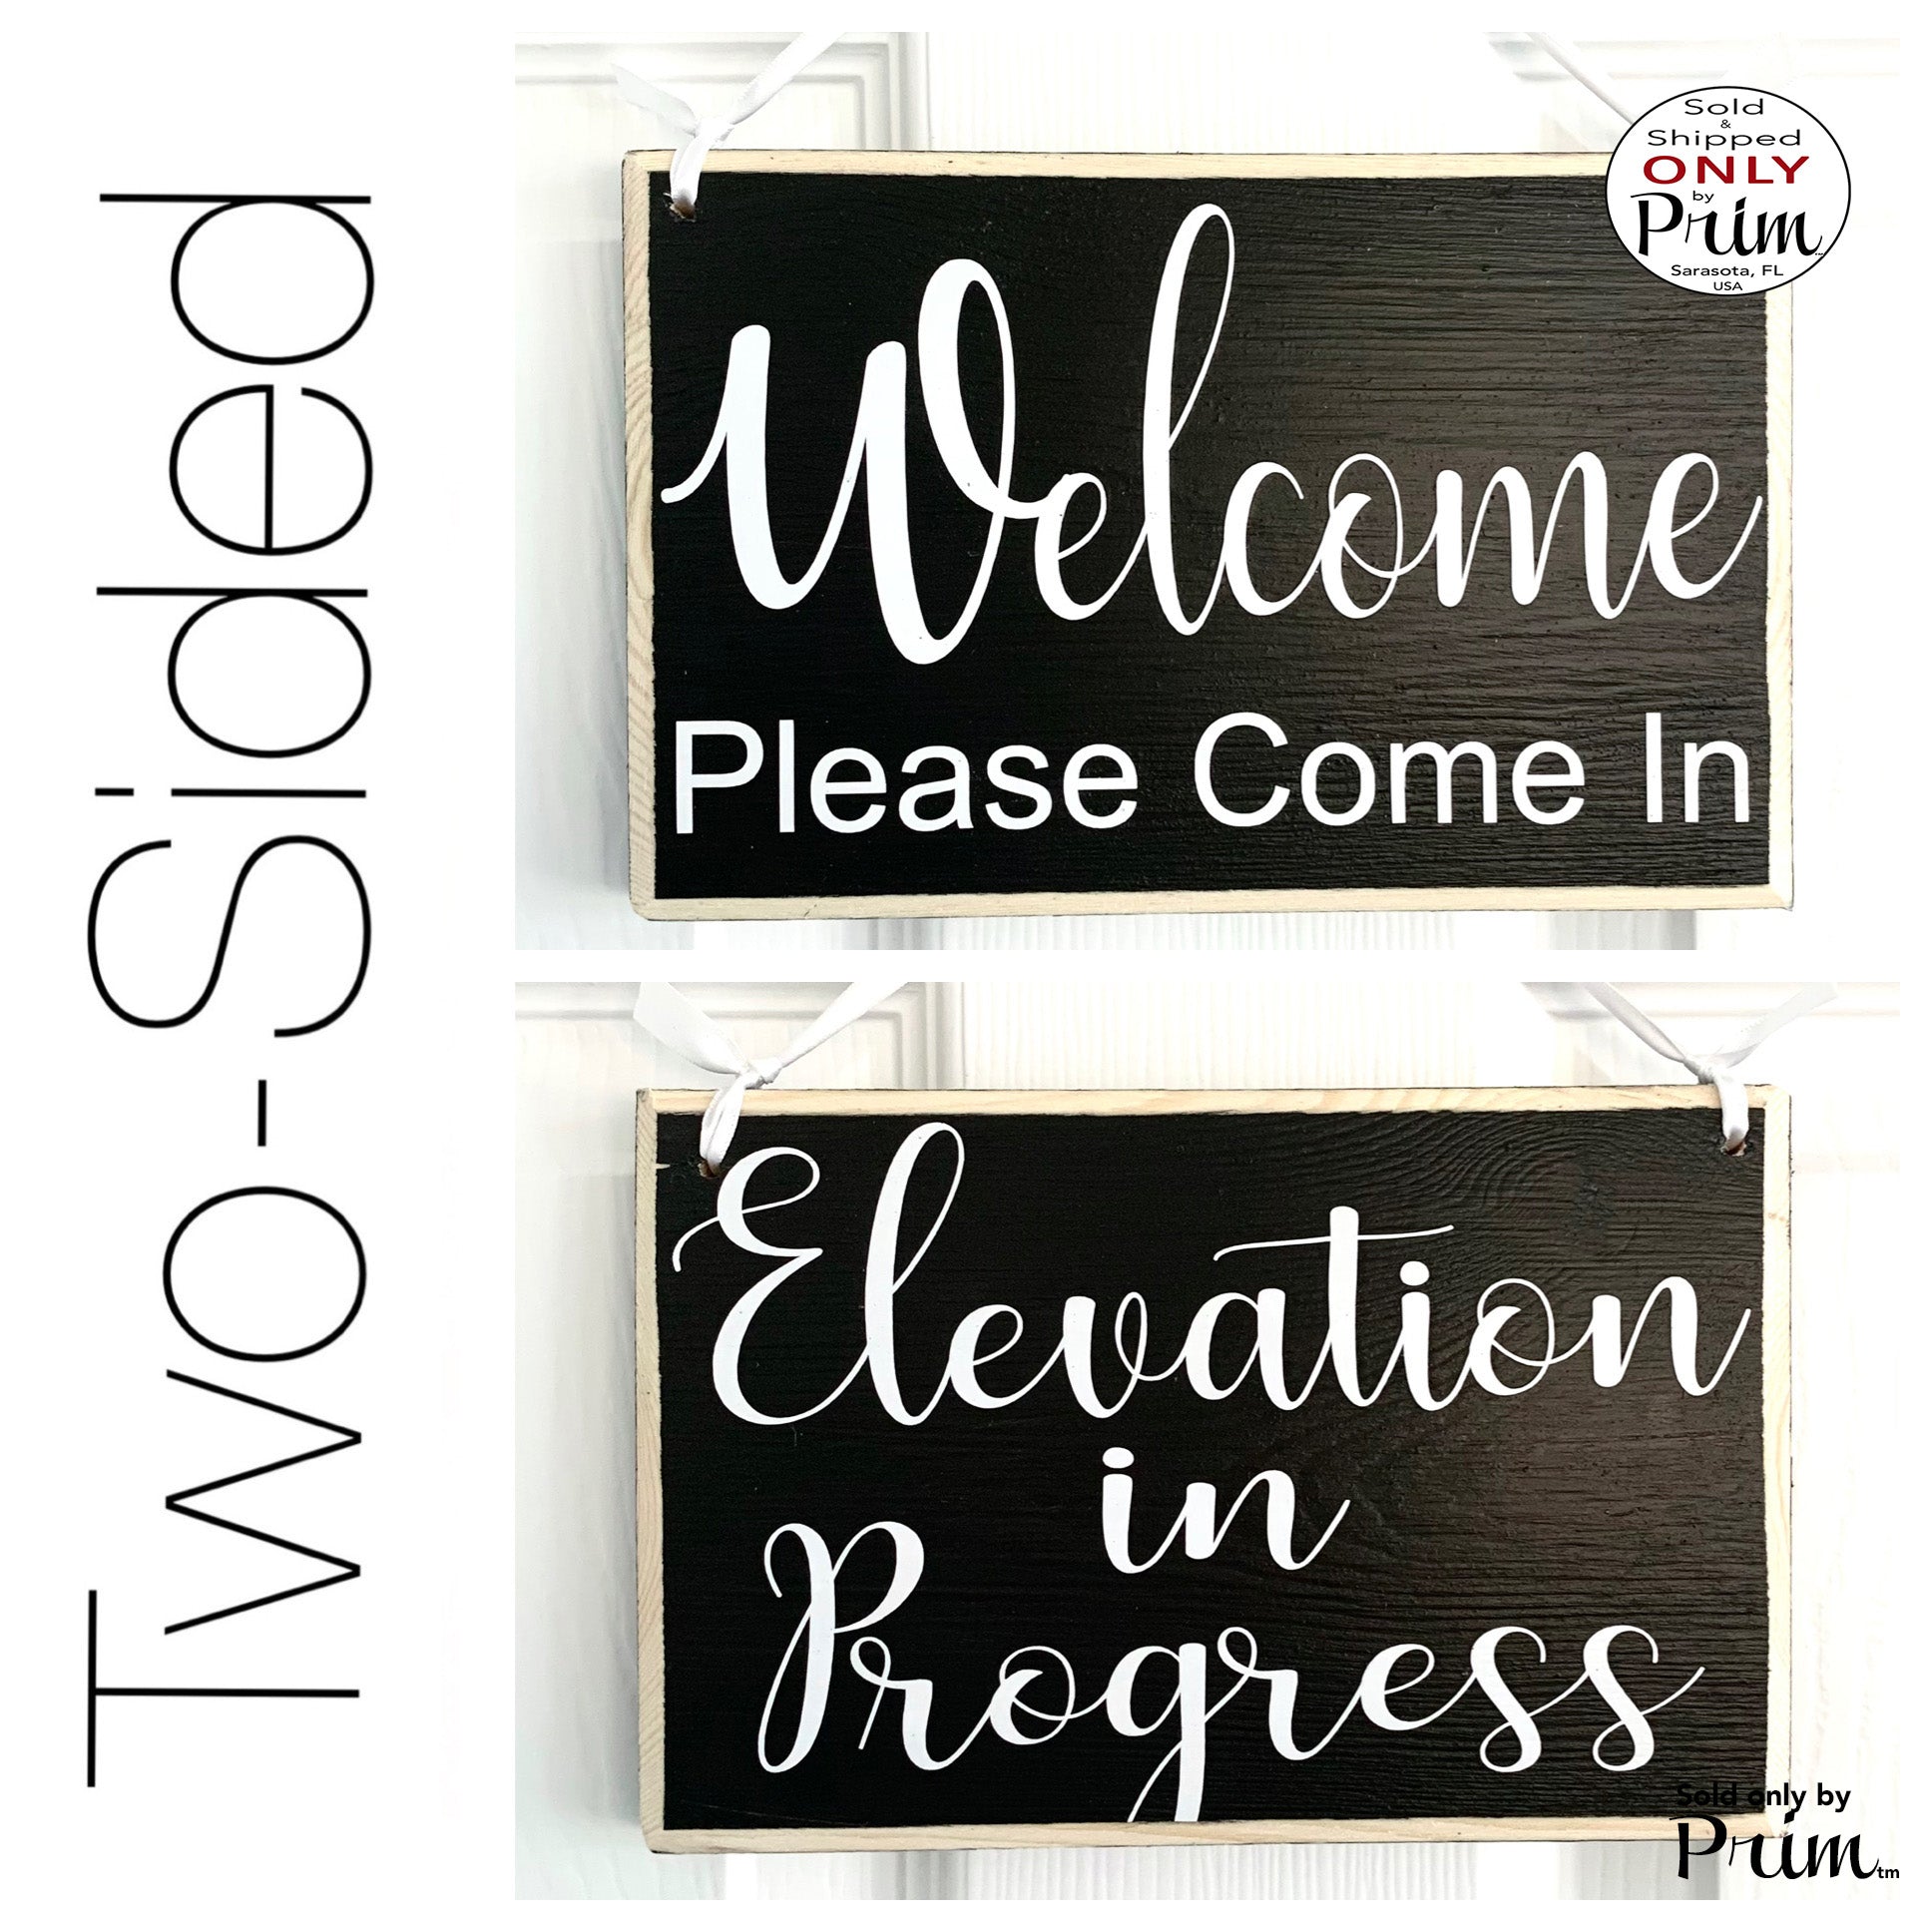 Designs by Prim 8x6 Elevation In Progress Welcome Session Do Not Disturb Spa Salon Two Sided Custom Wood Sign Welcome Home Office Door Hanger Plaque